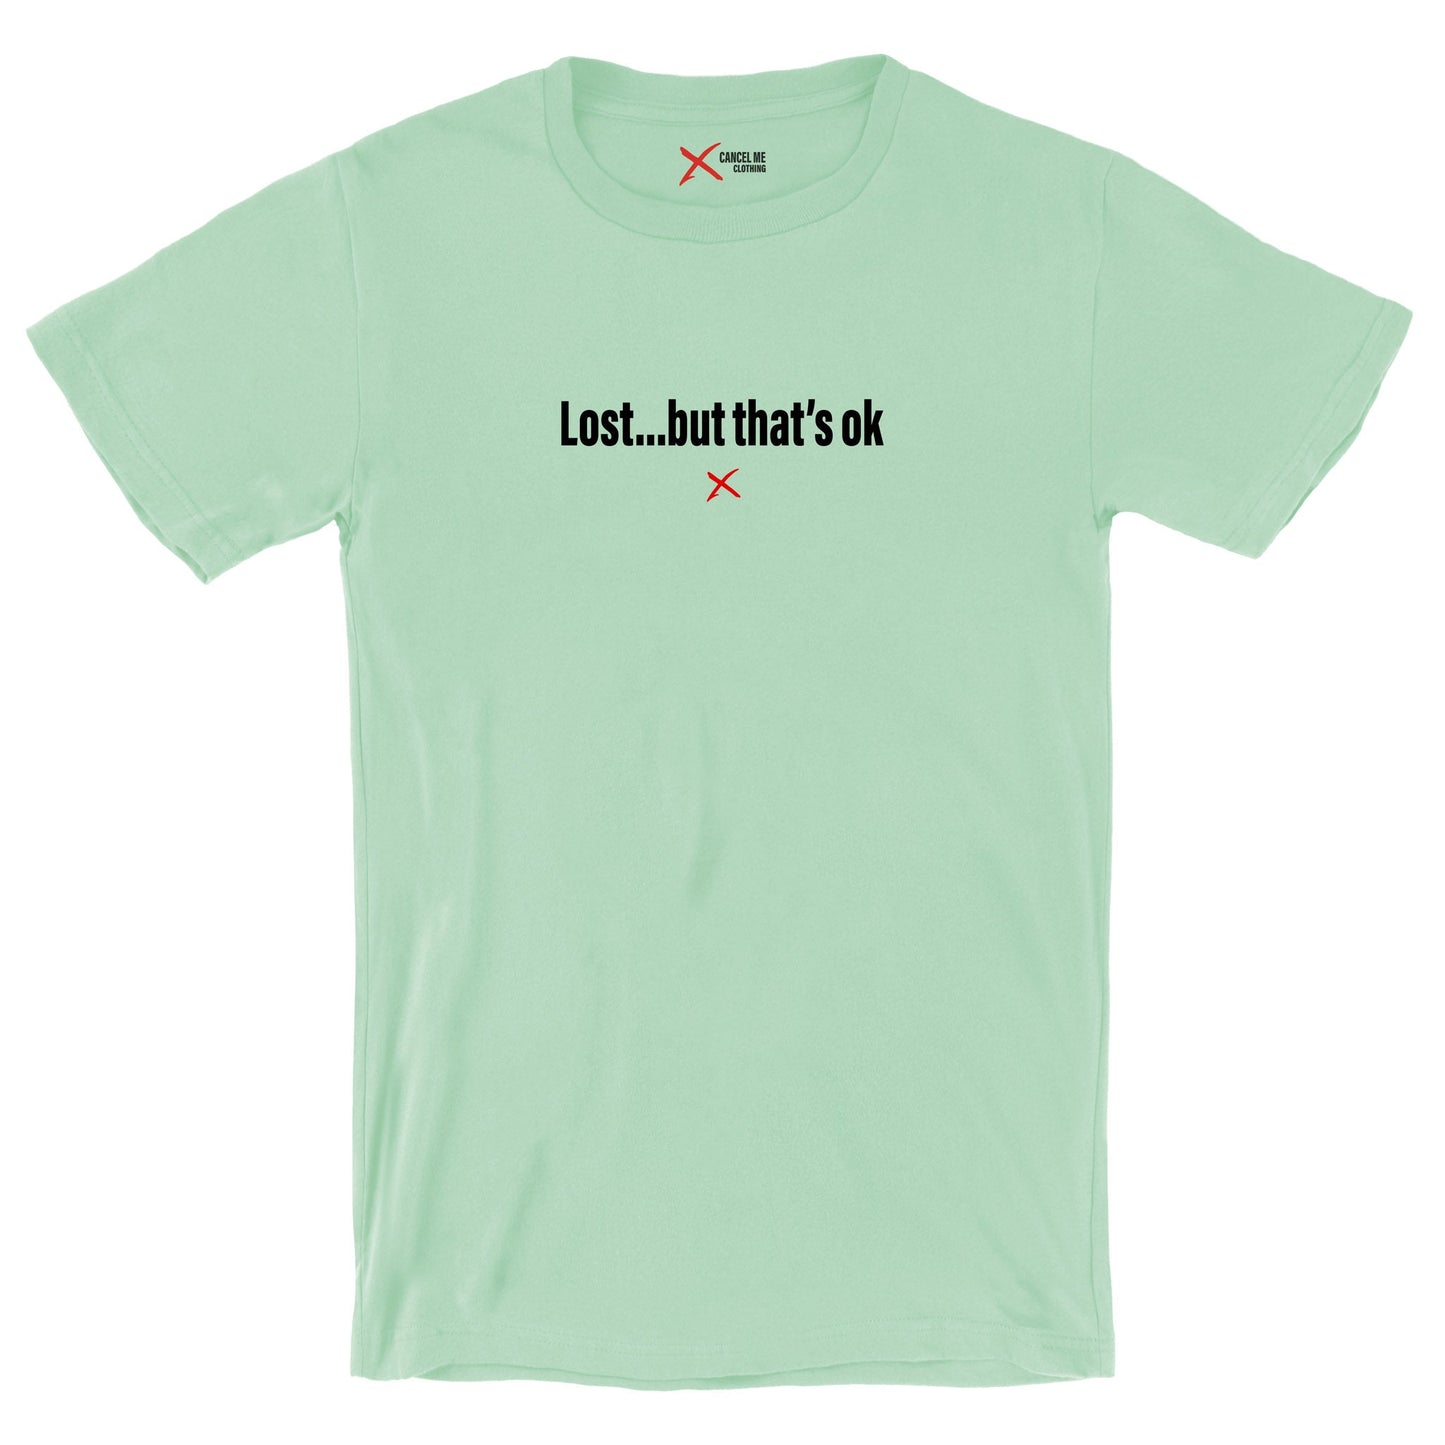 Lost...but that's ok - Shirt